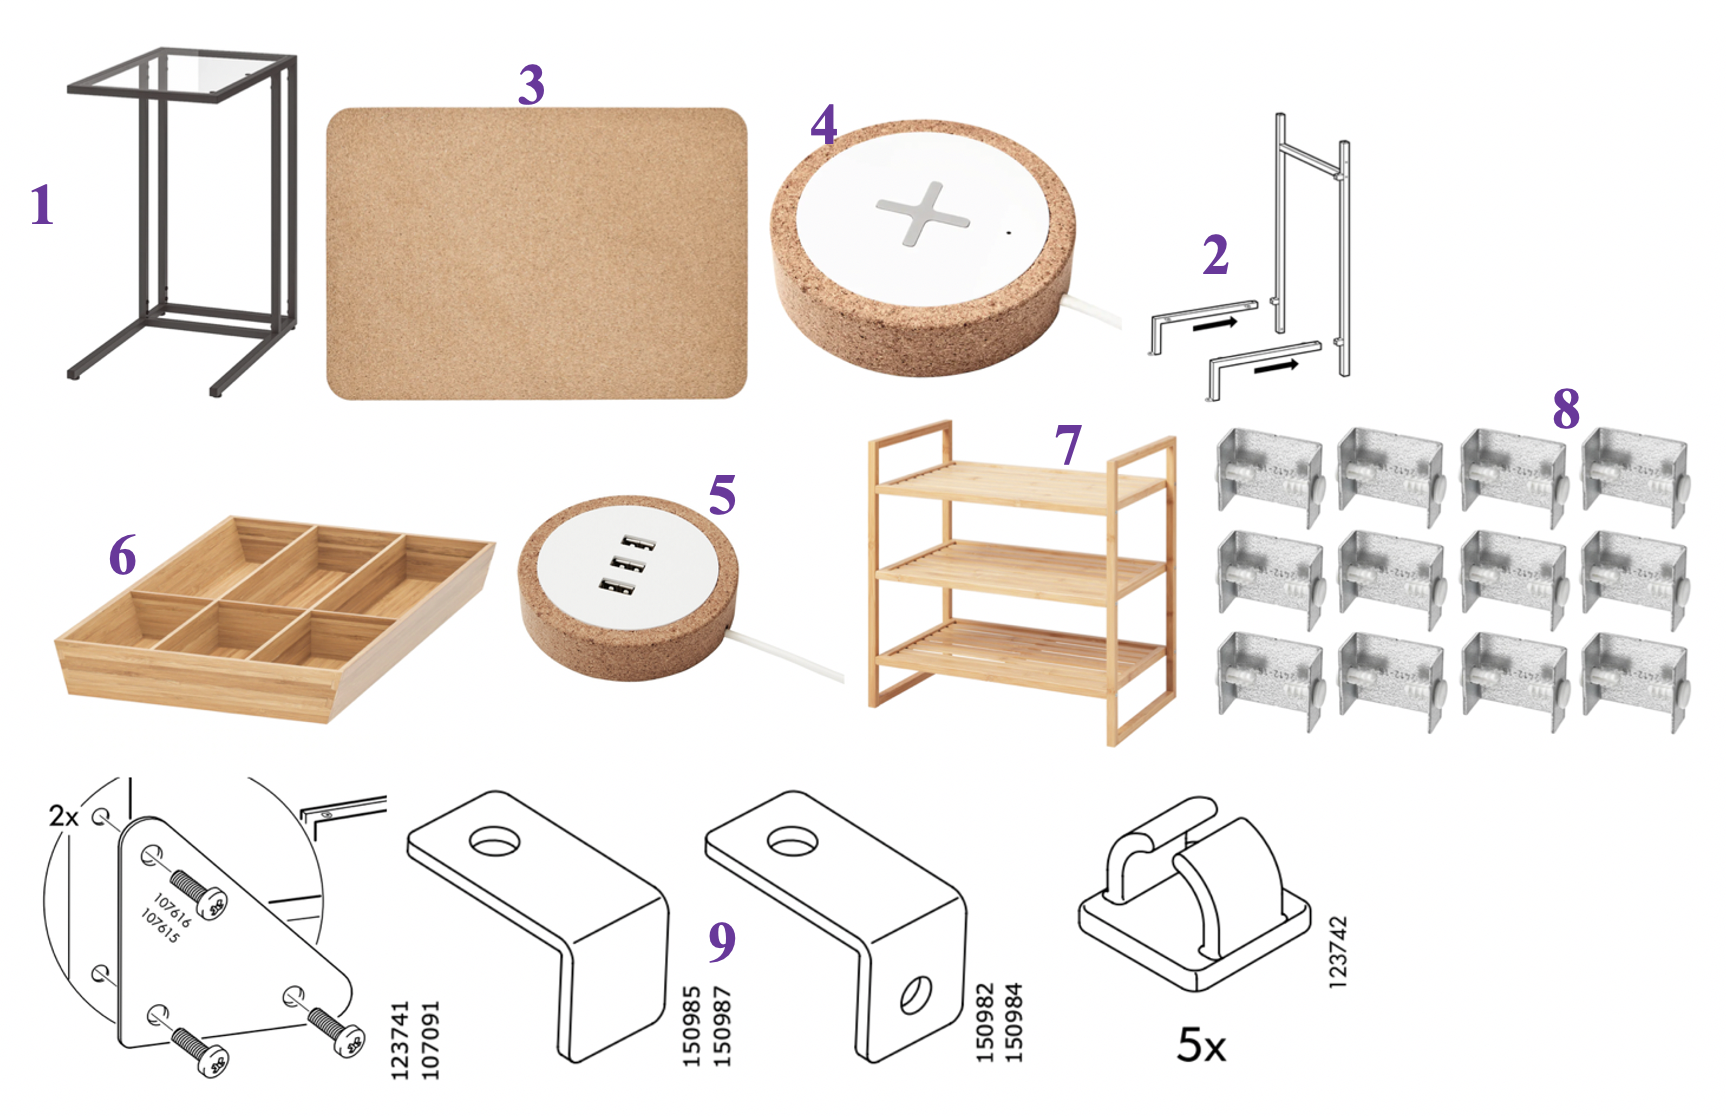 Detail of Ikea components